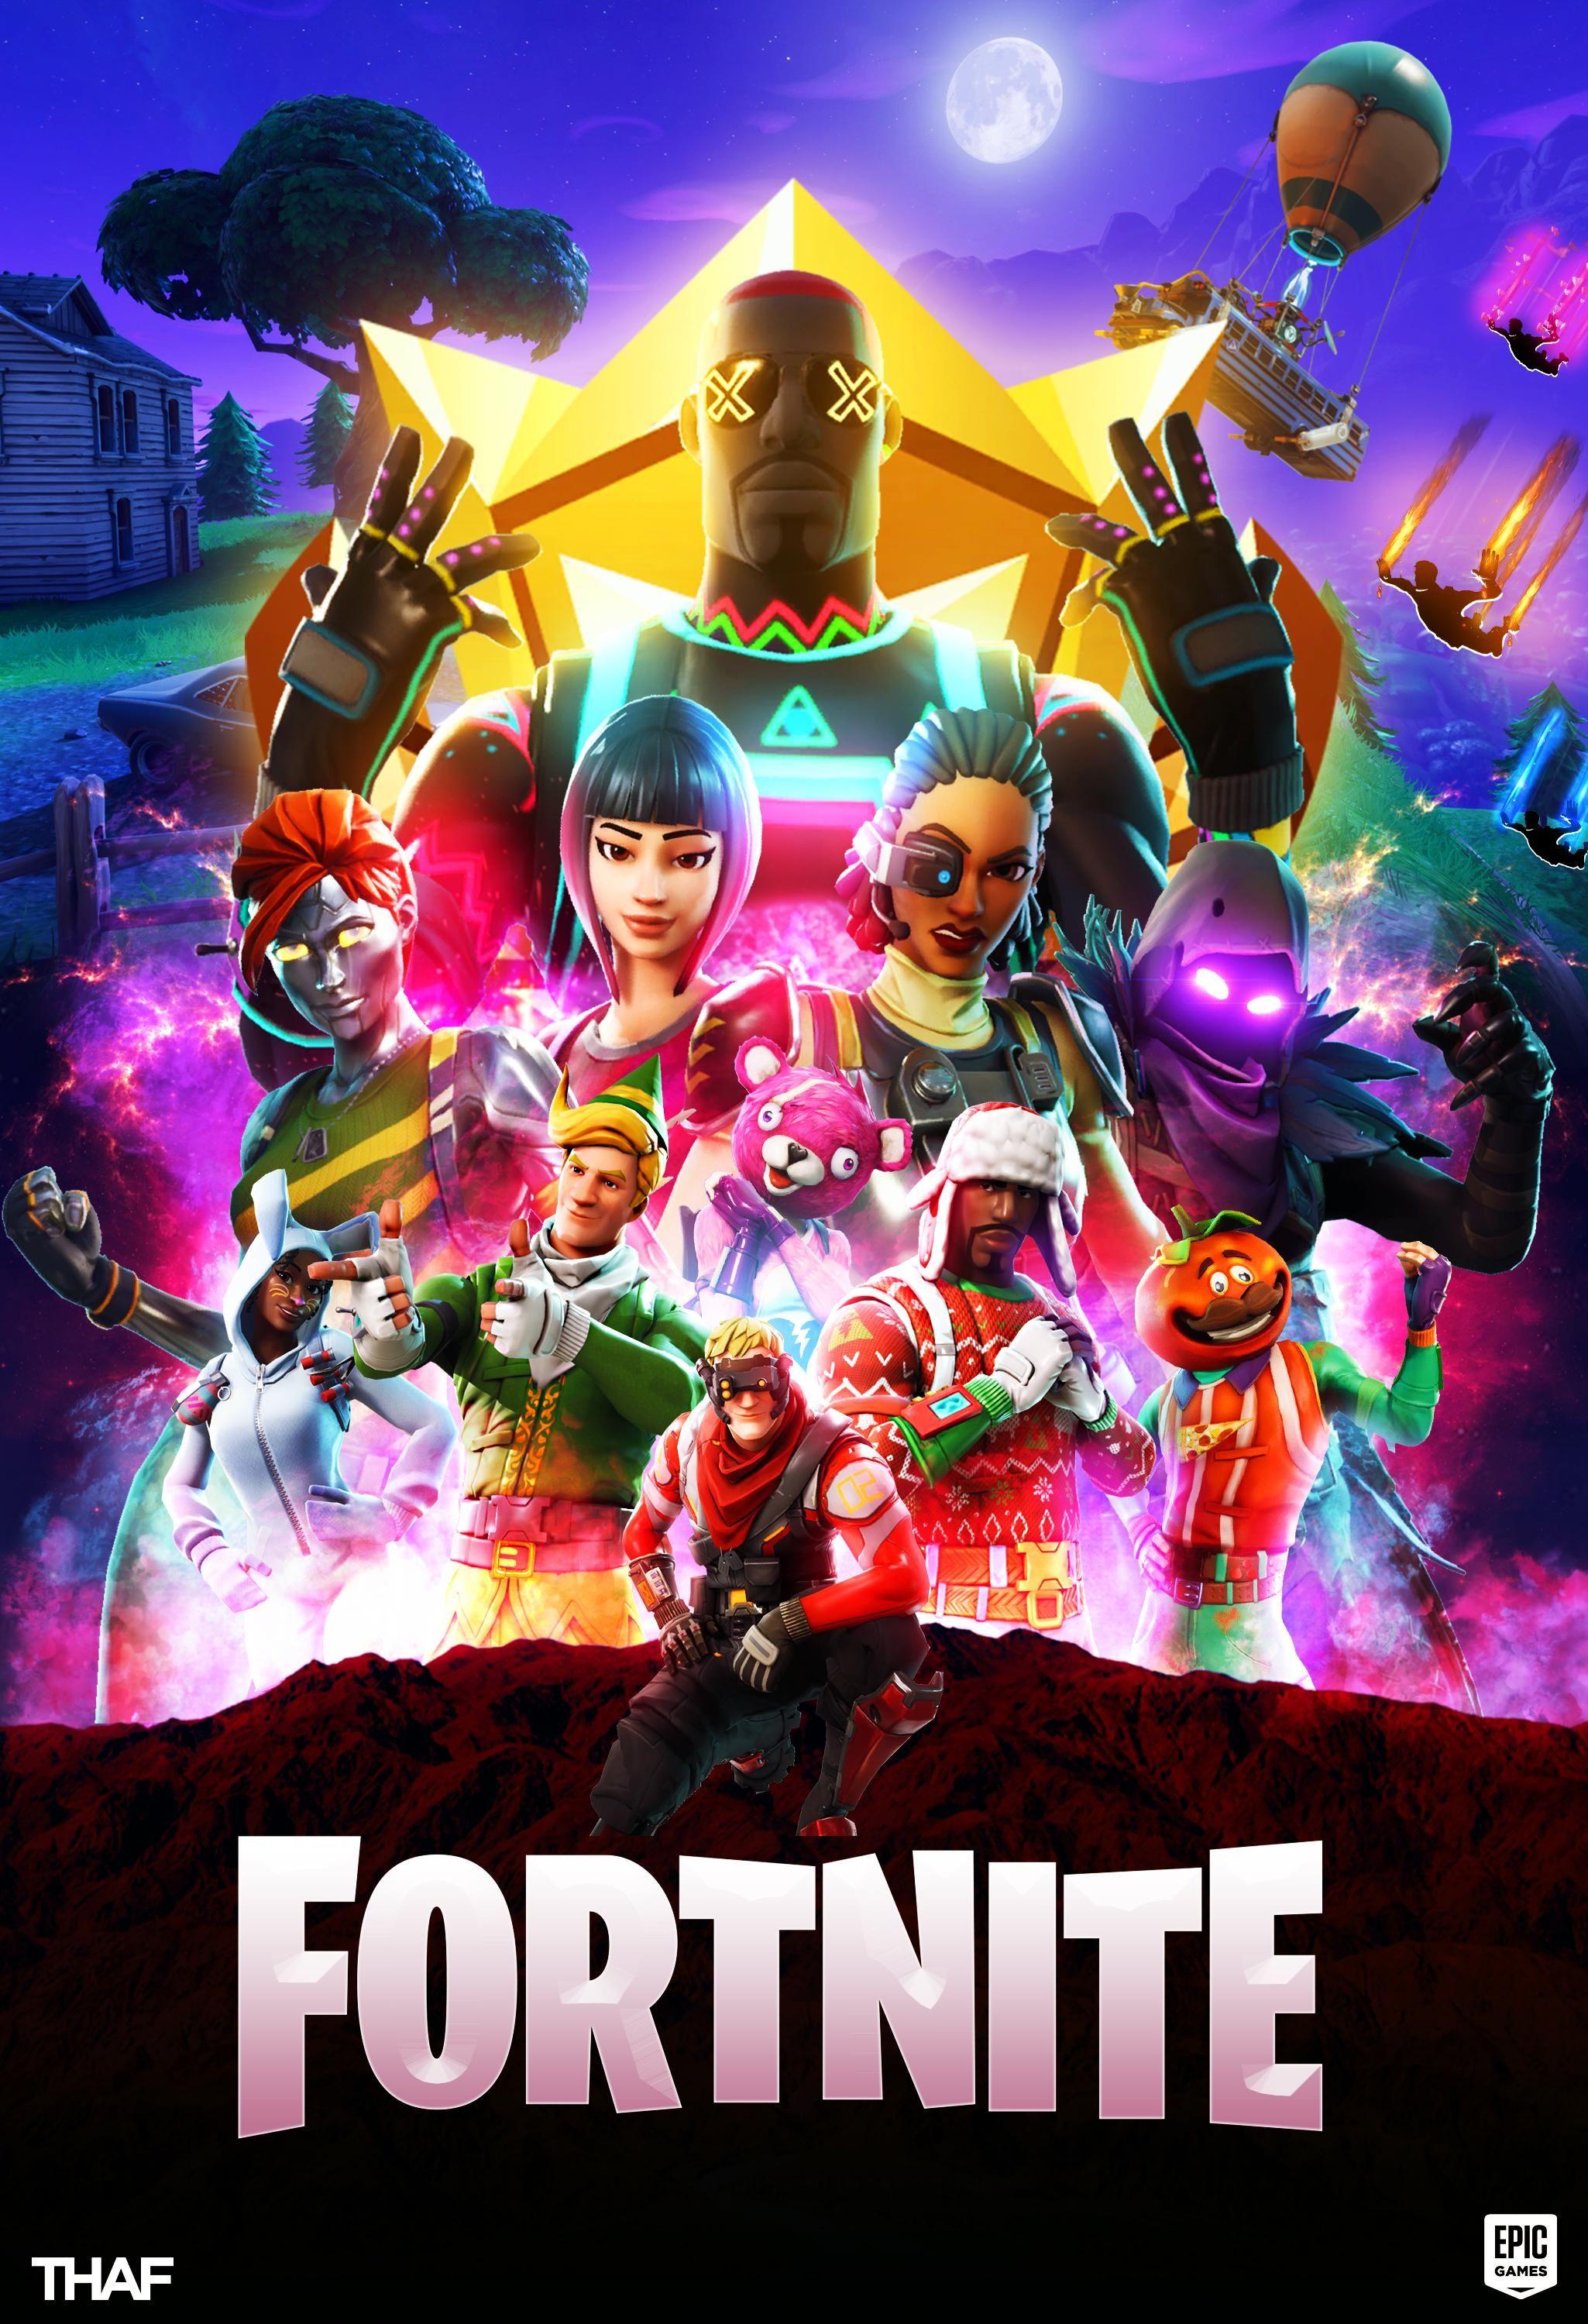 Free download Made this poster for Fortnite after the Avengers